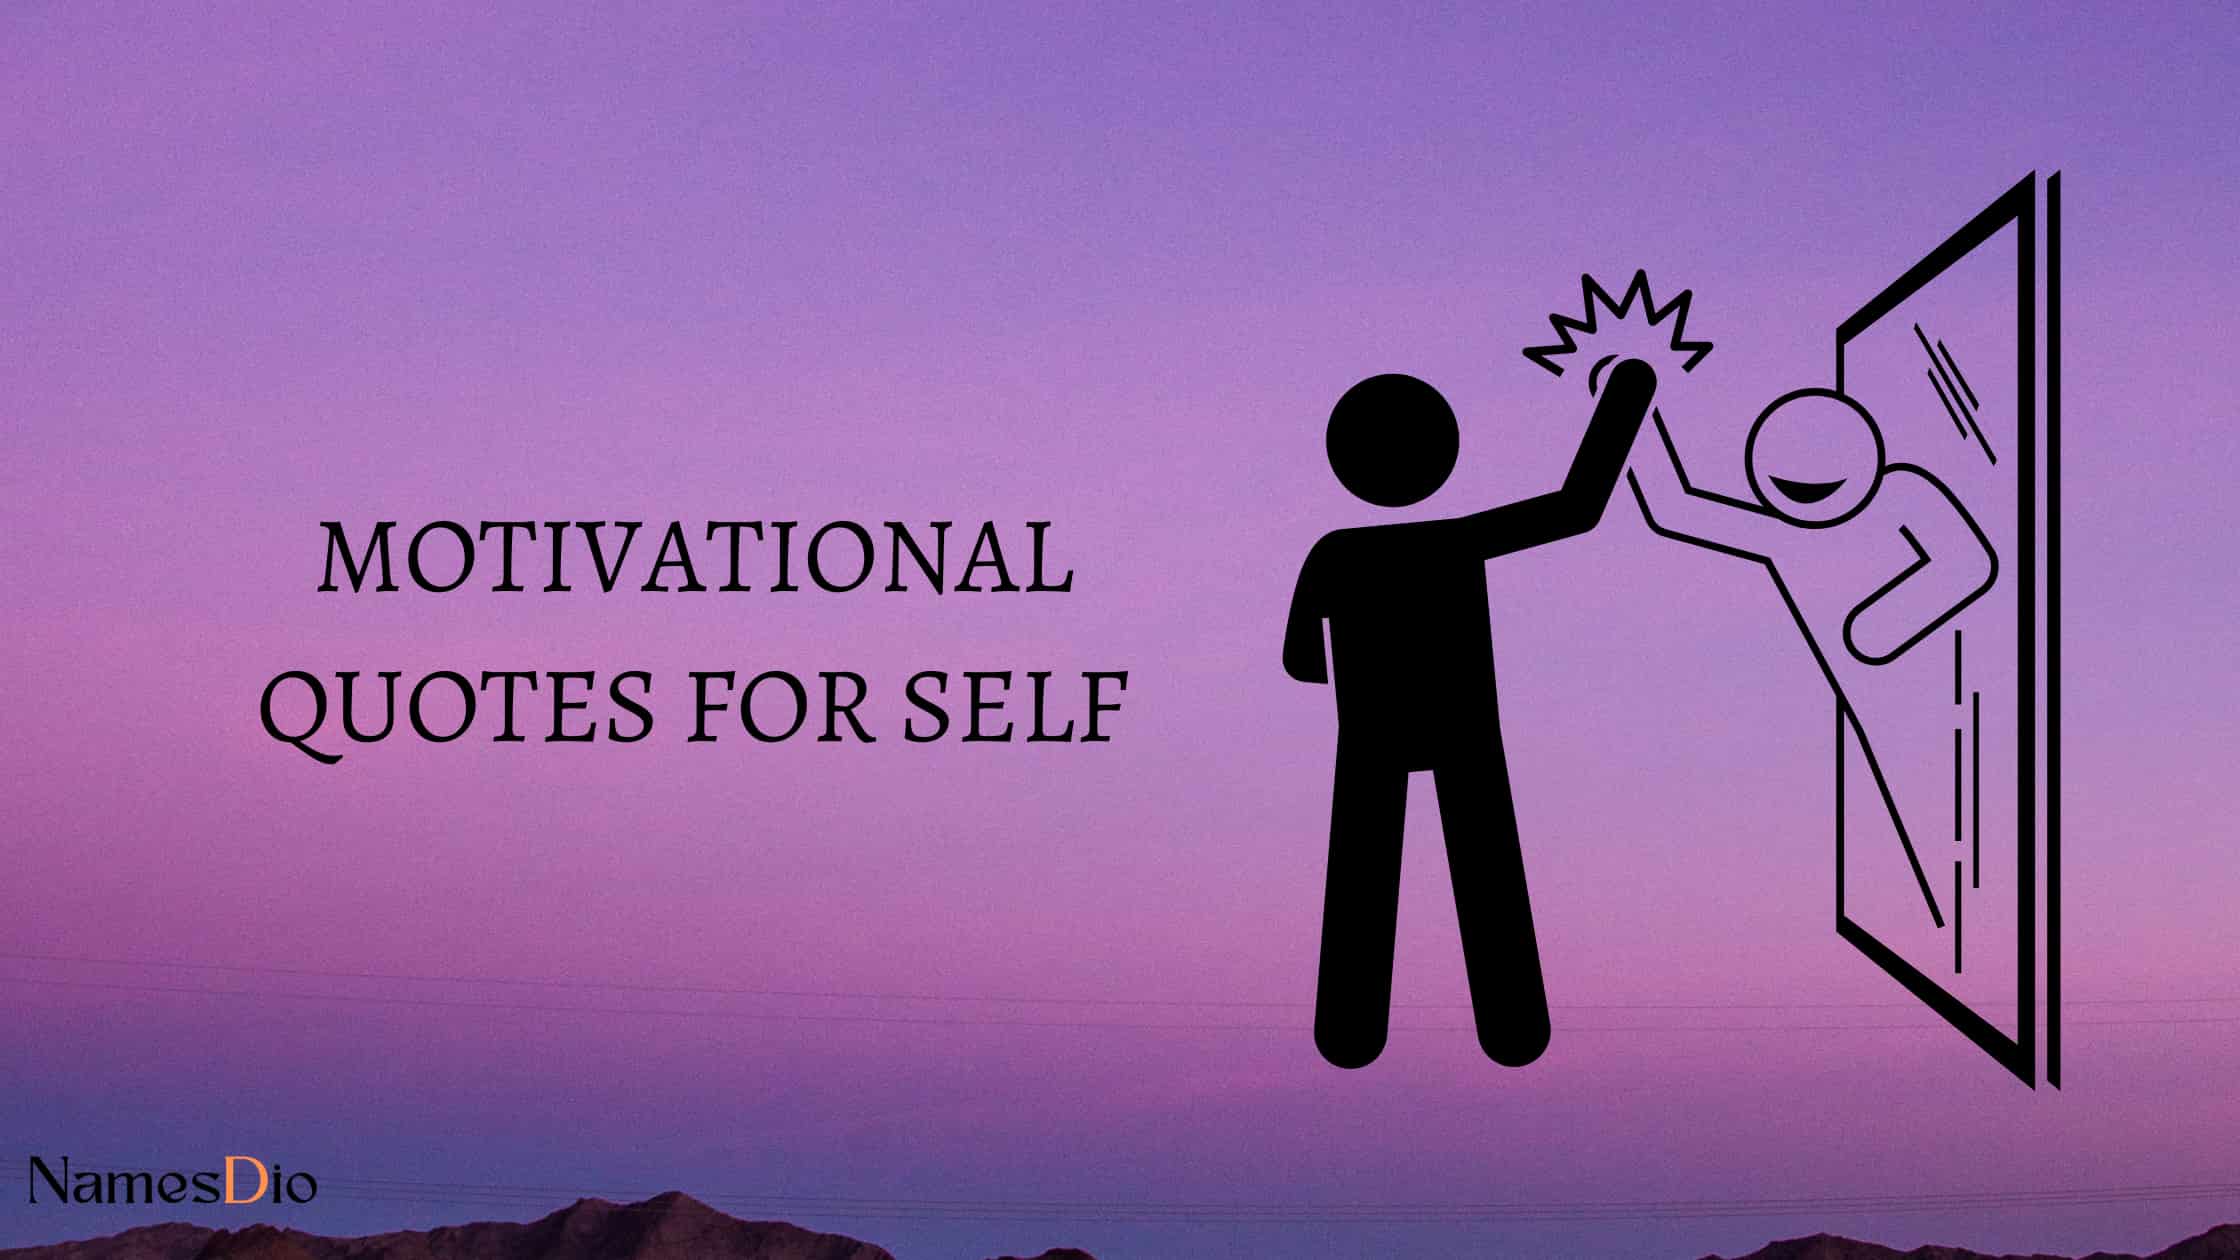 Motivational-Quotes-for-Self